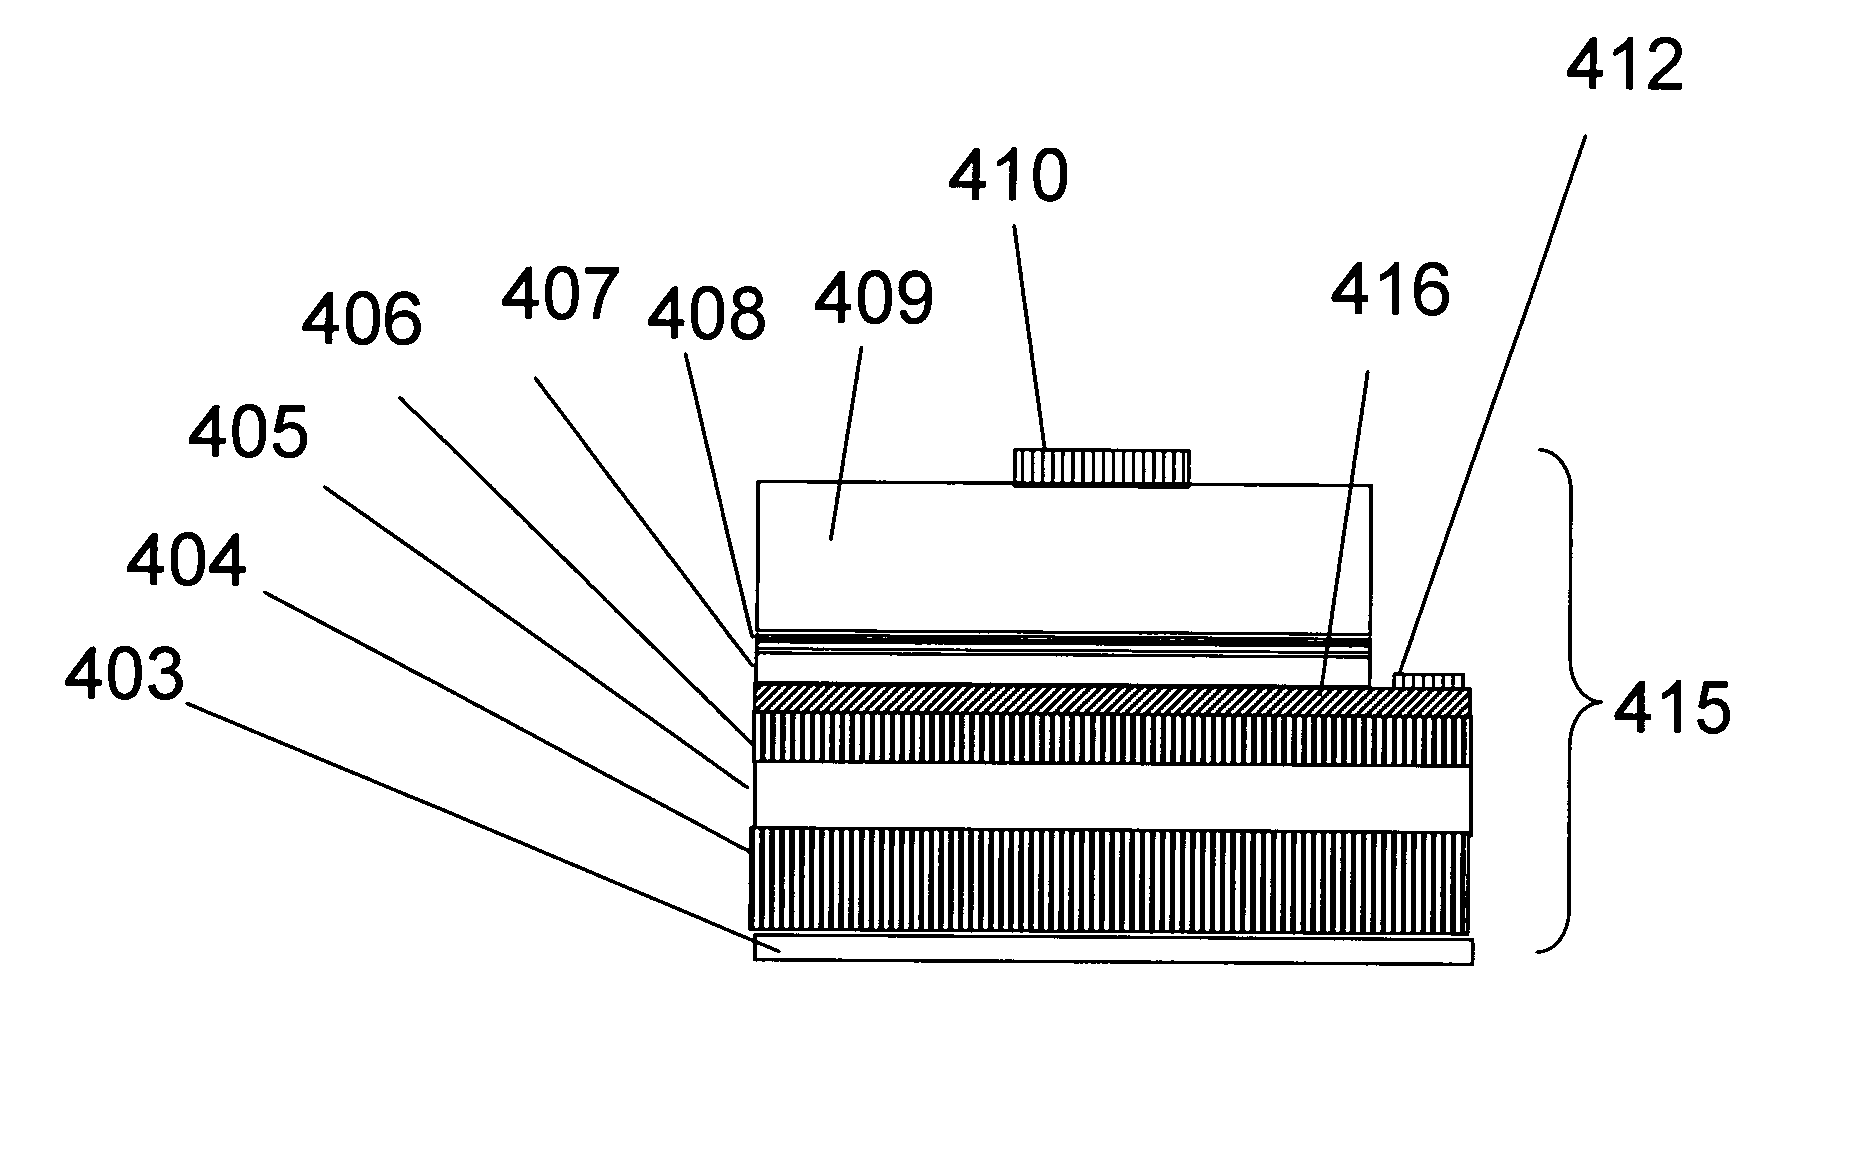 Electrically isolated vertical light emitting diode structure